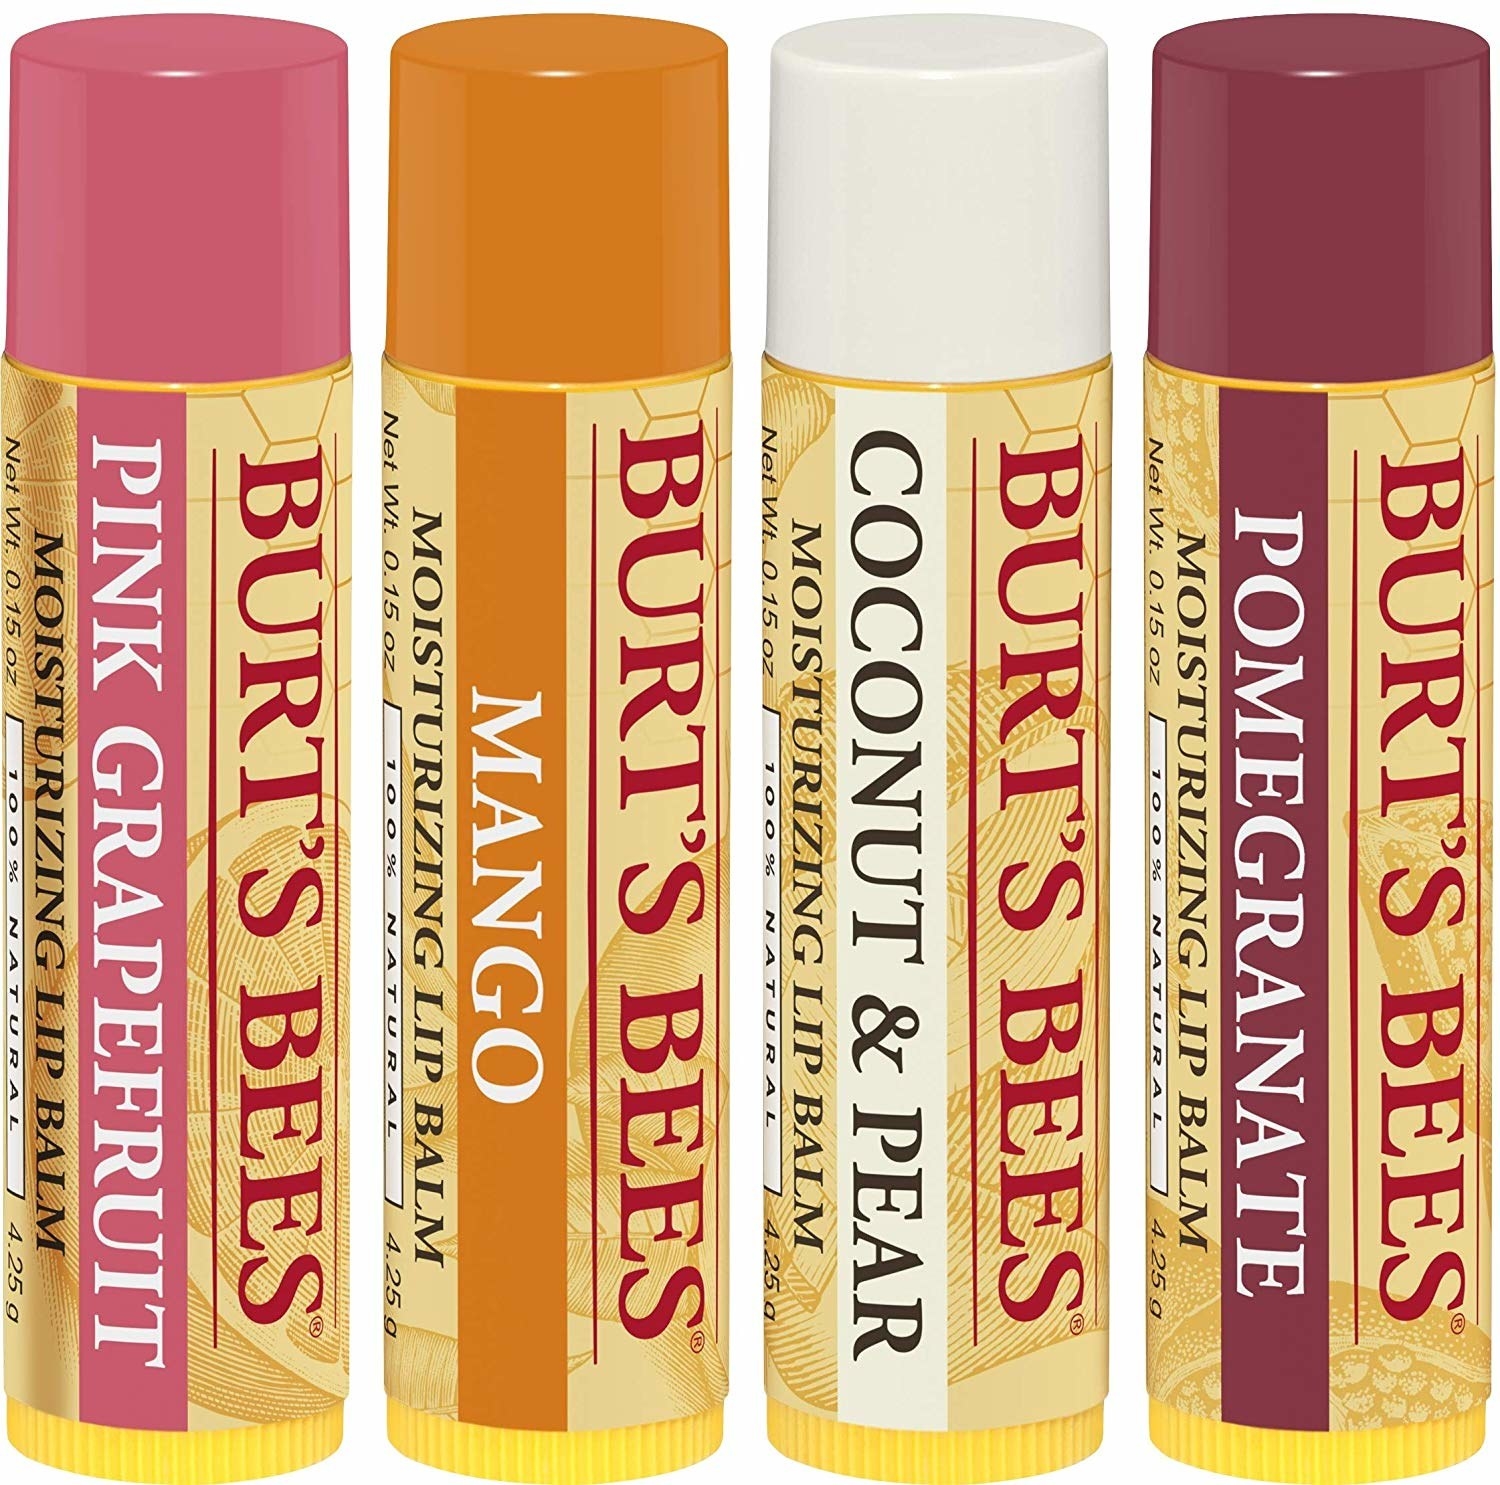 Tubes of lip balm in grapefruit, mango, coconut and pear, and pomegranate flavors